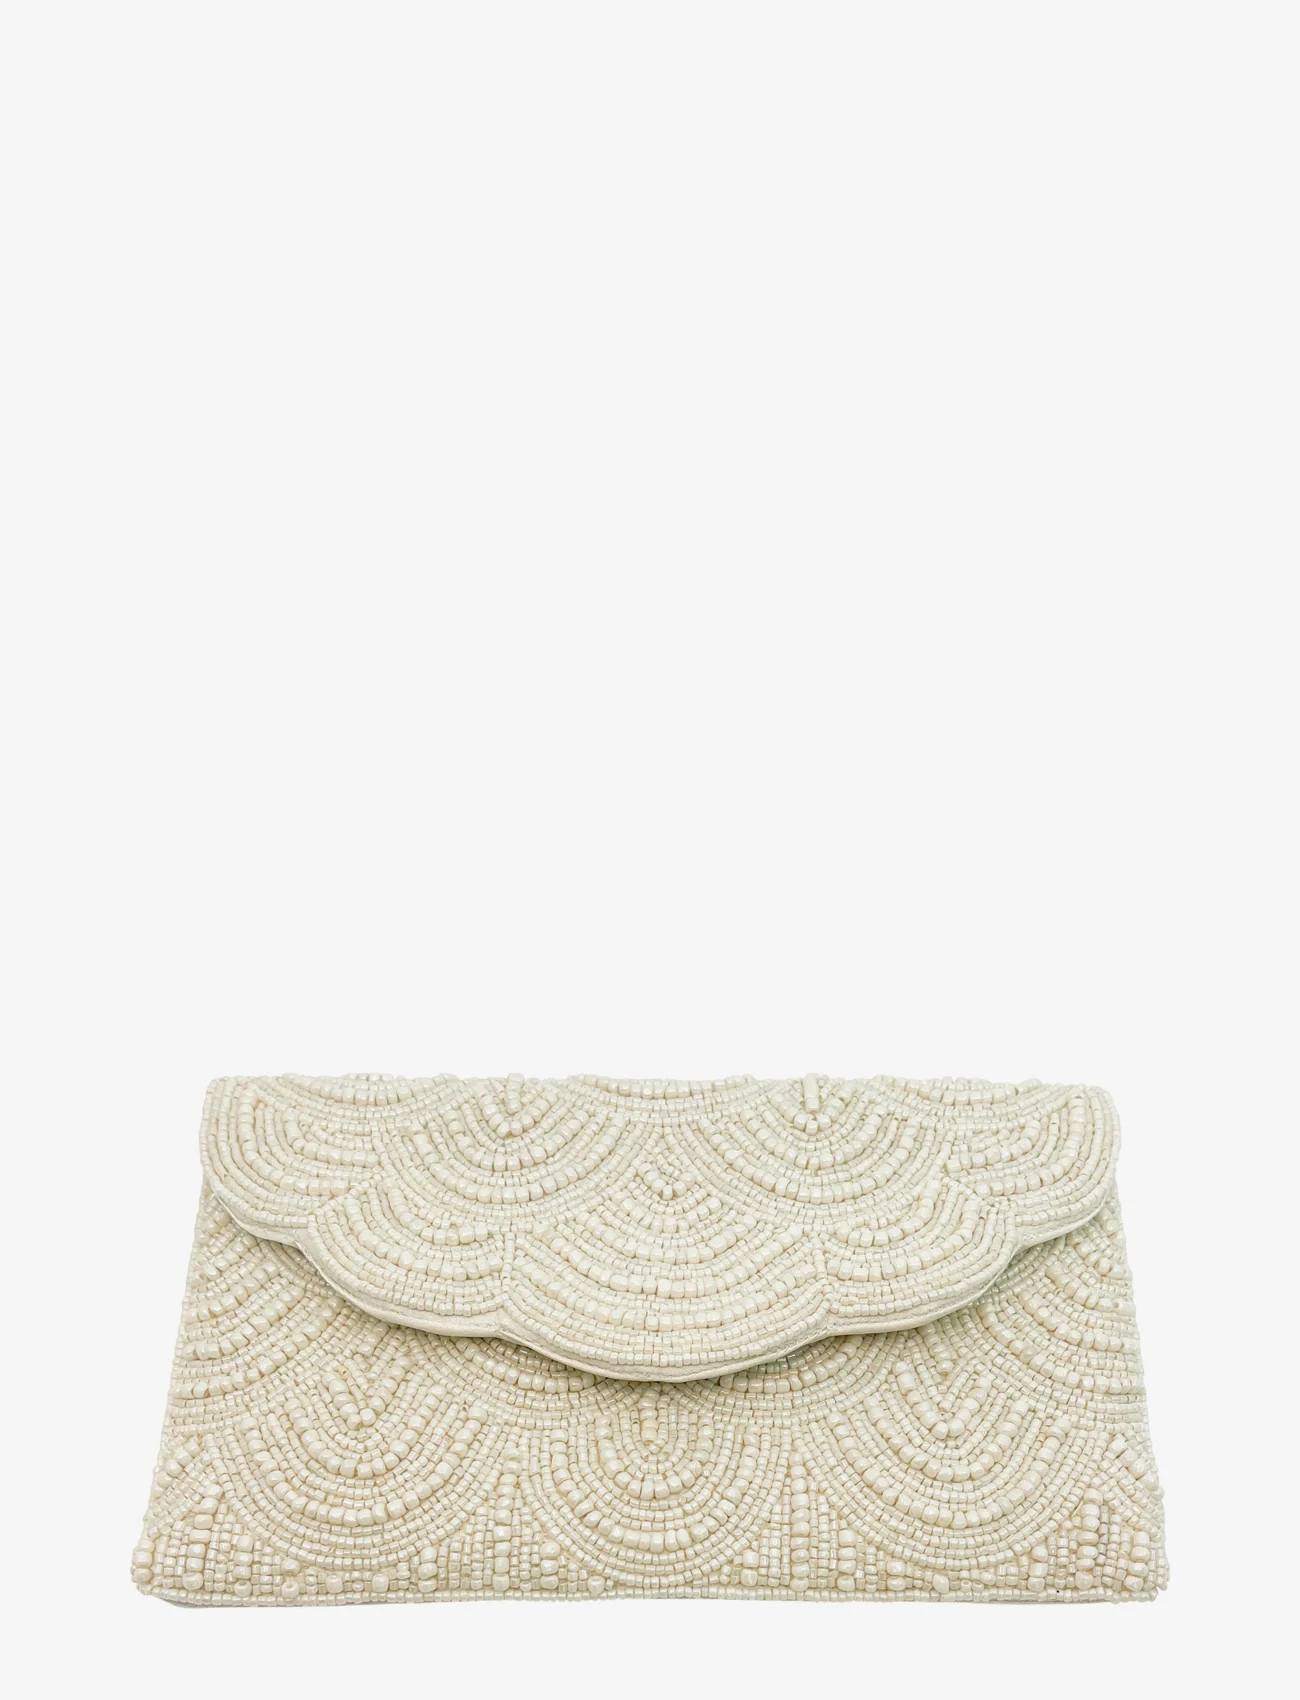 Pipol's Bazaar - Casablanca Clutch Near White - party wear at outlet prices - white - 0